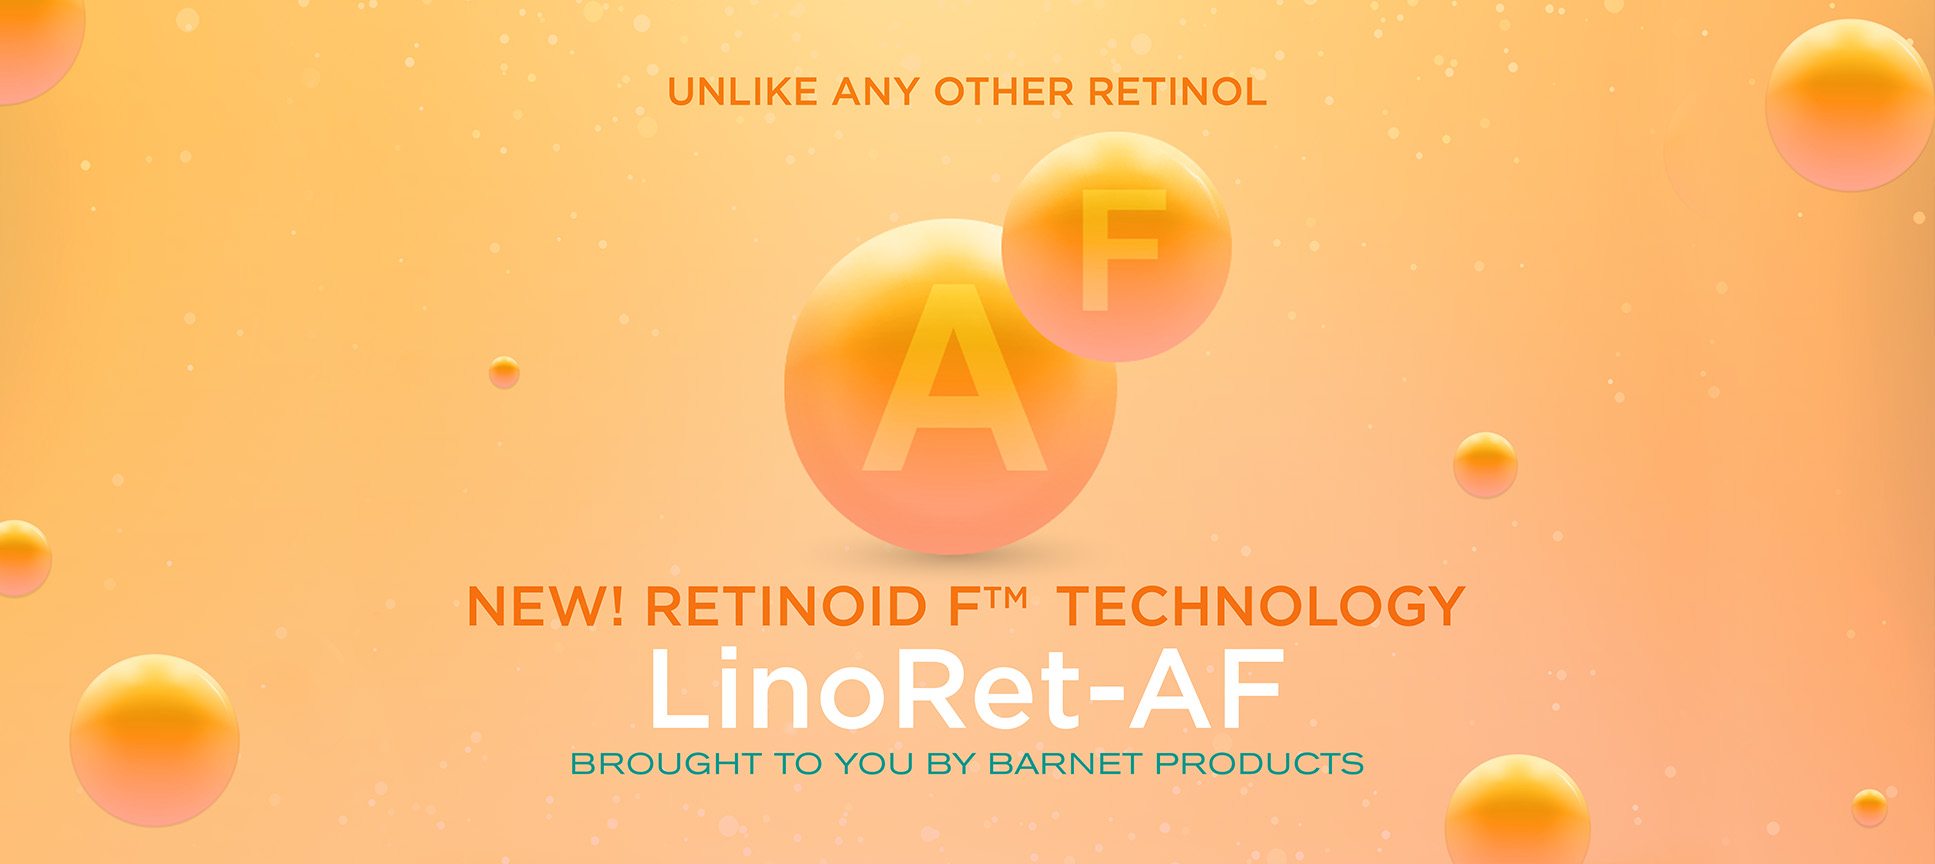 Retinoid F Technology: The Benefits of Retinol Without the Negatives